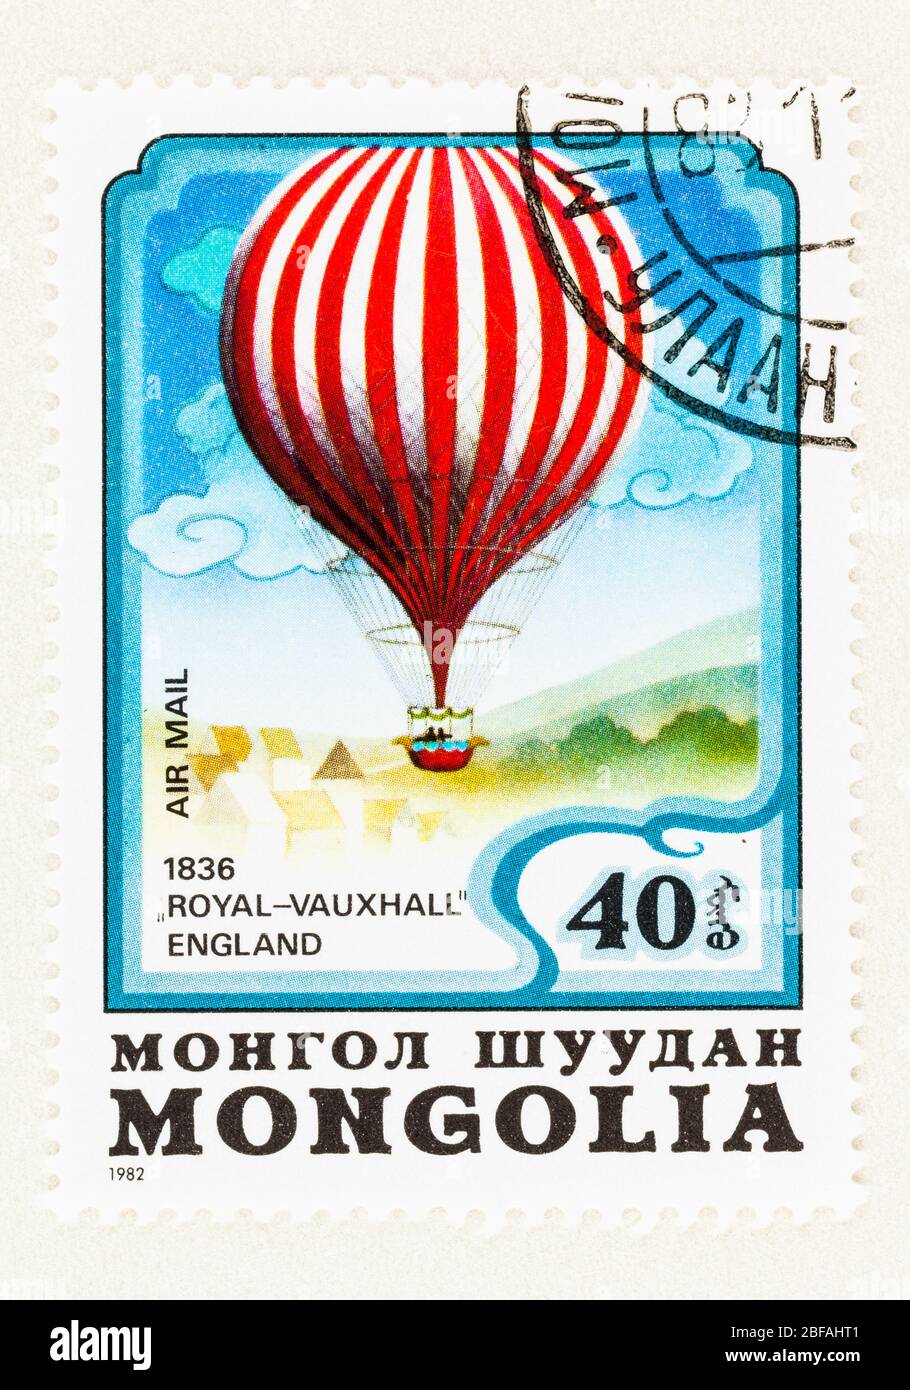 SEATTLE WASHINGTON - April 16, 2020: Postage stamp of Mongolia issued in 1982, featuring the manned un-tethered hot air balloon flight of 1836. Stock Photo